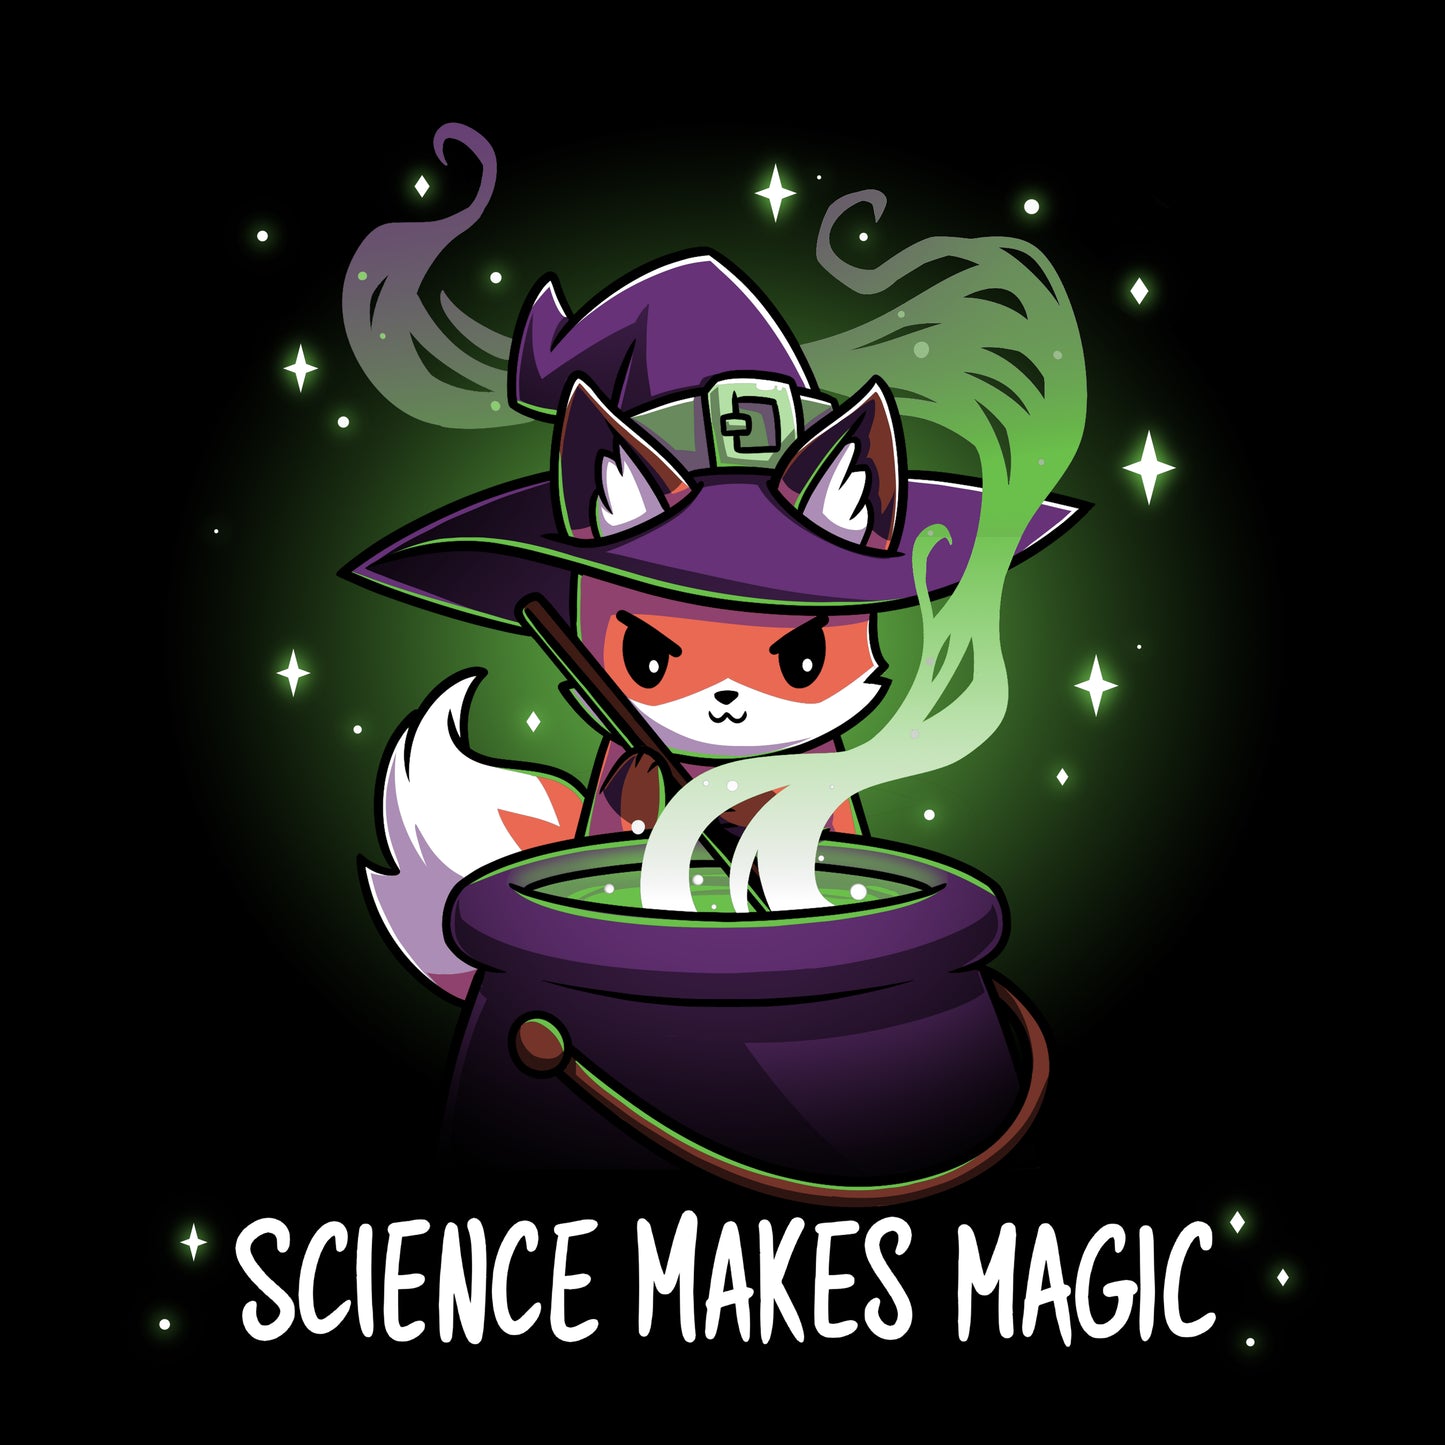 A Science Makes Magic t-shirt featuring a fox in a hat showcasing the magical science by TeeTurtle.